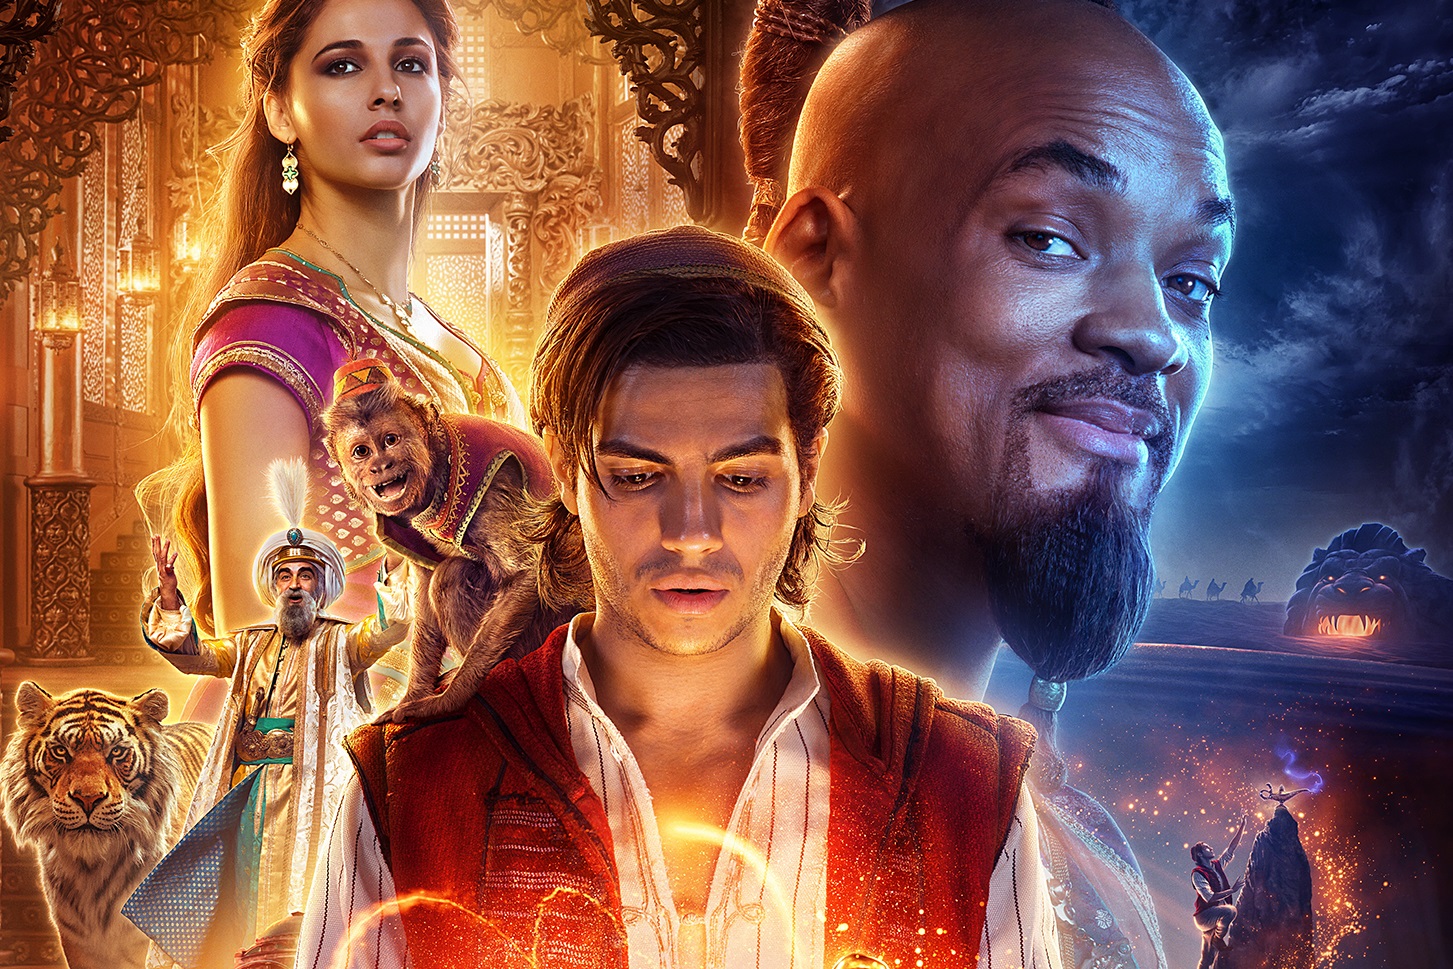 [Trailer] Aladdin Trailer Brings Us to a Whole New World